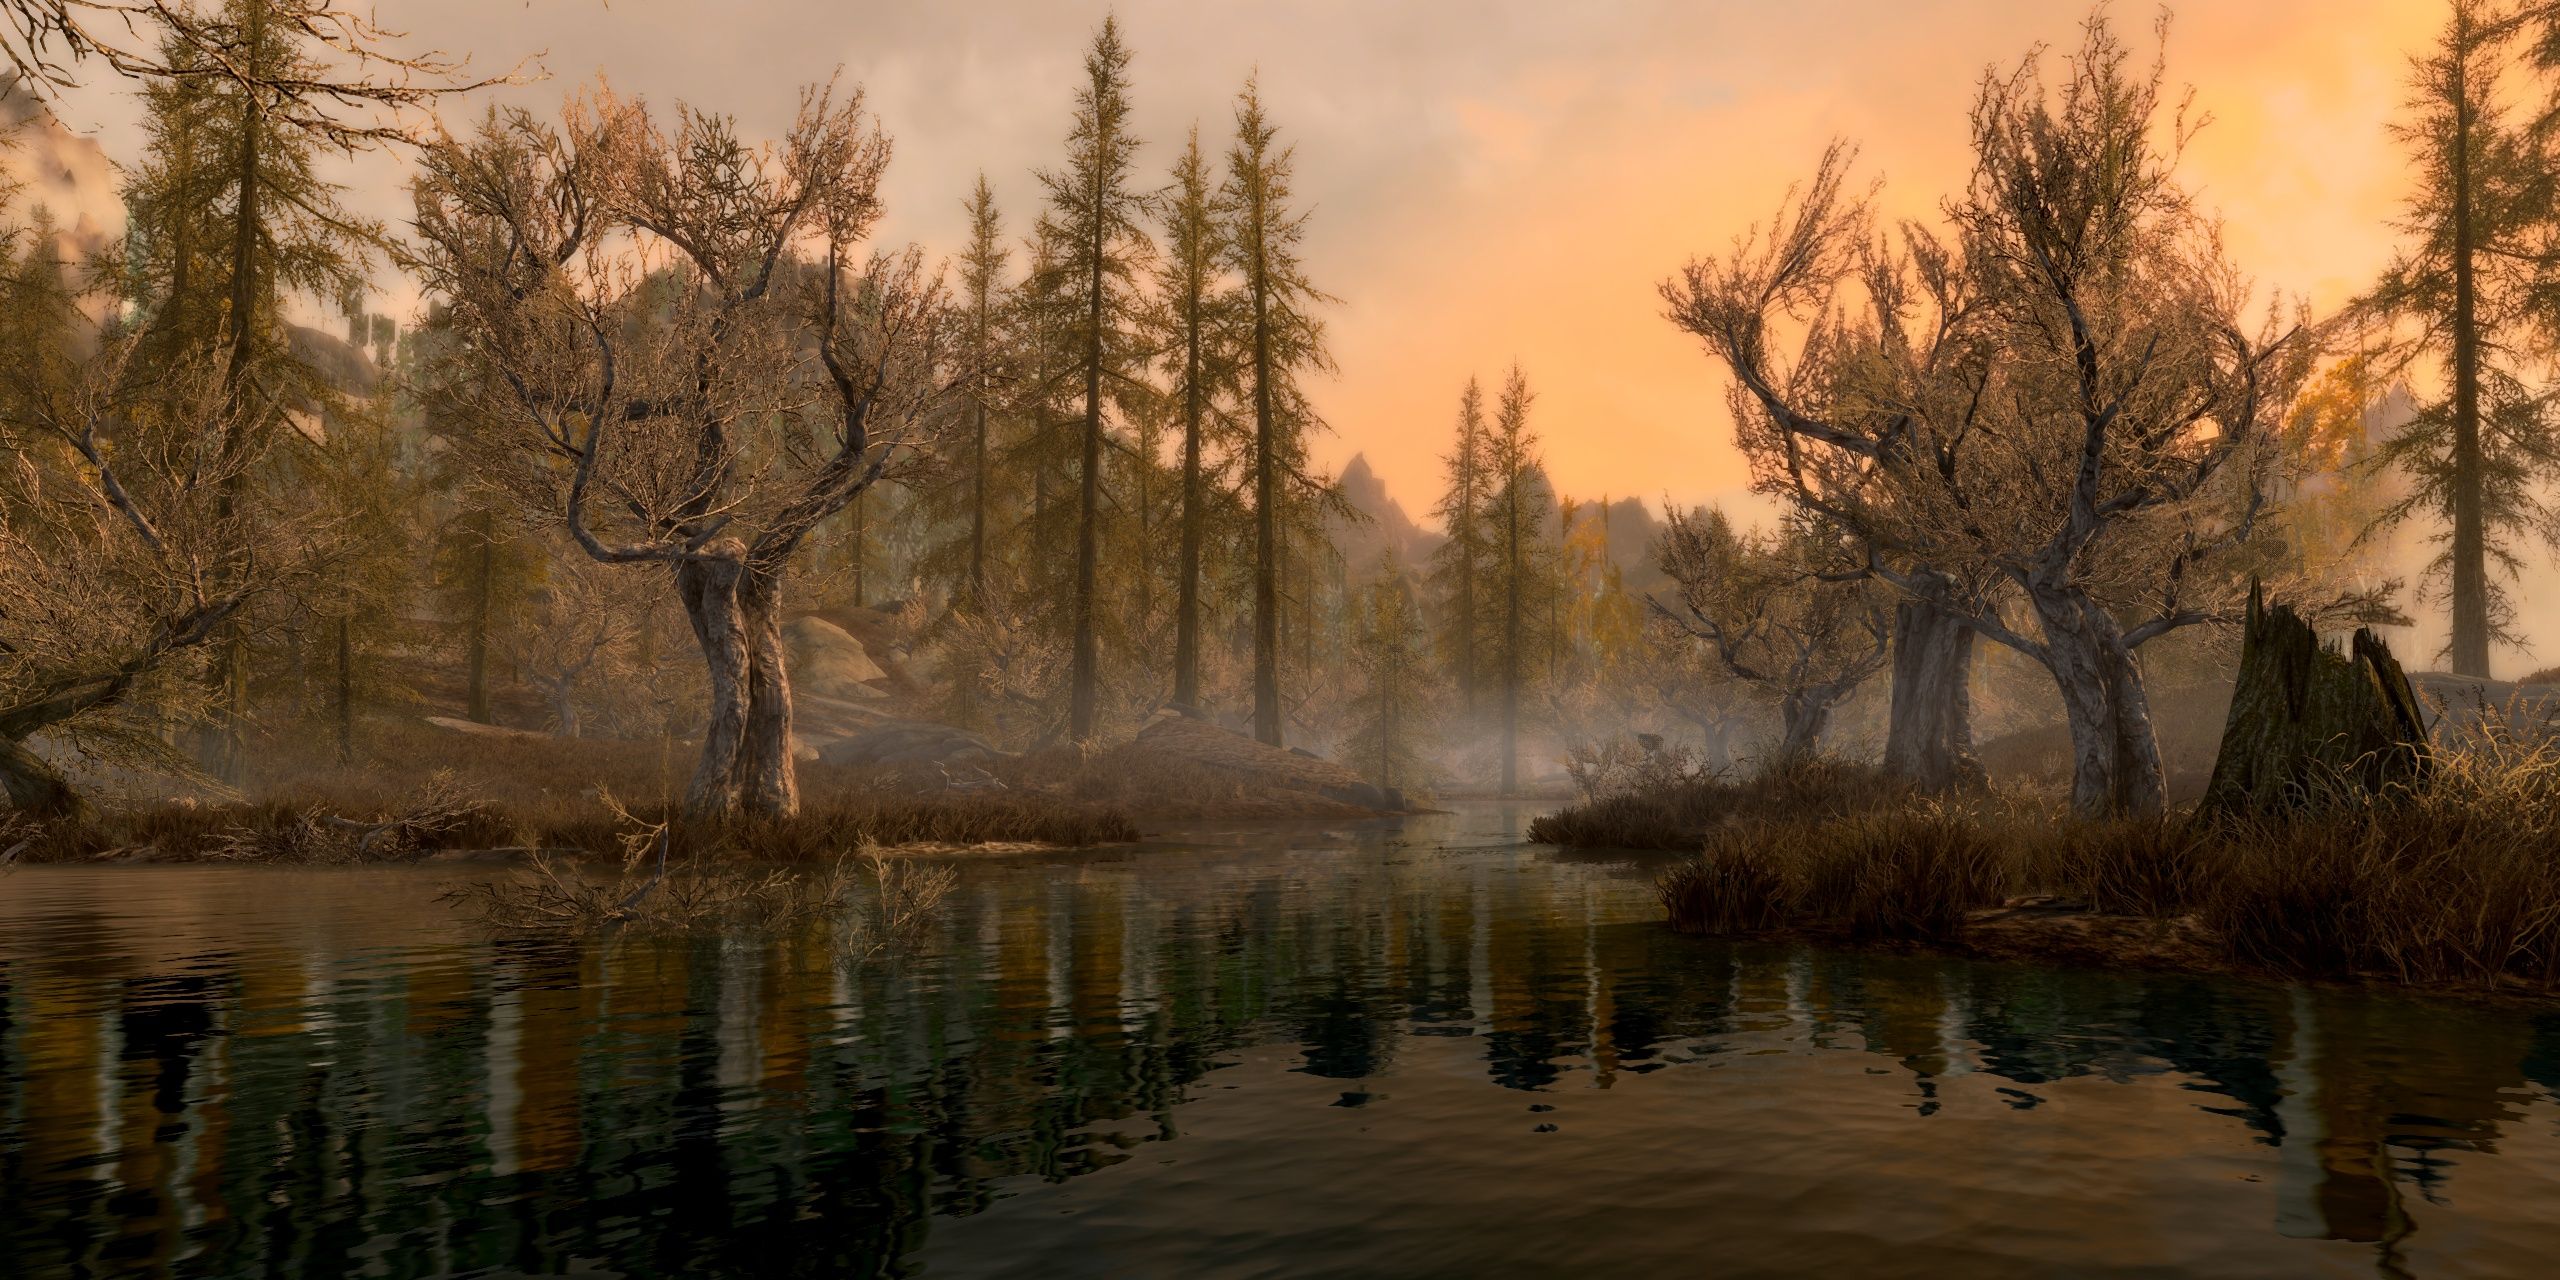 https://www.reddit.com/r/skyrim/comments/70l4xs/a_rare_moment_of_peace_in_the_morthal_swamps/